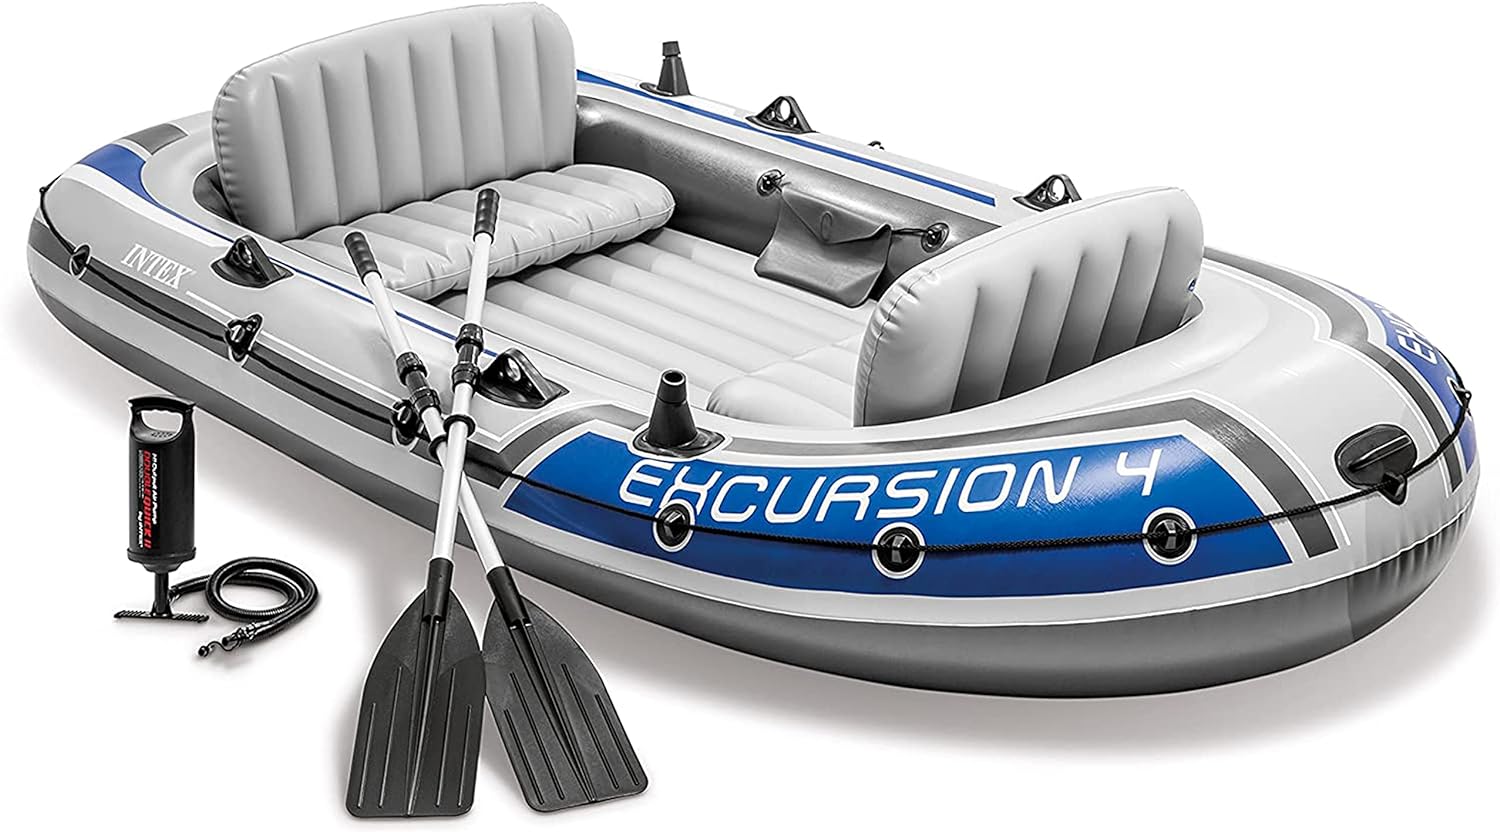 INTEX Excursion Inflatable Boat Series: Includes Deluxe 54in Aluminum Oars and High-Output Pump – SuperStrong PVC – Adjustable Seats with Backrest – Fishing Rod Holders – Welded Oar Locks - INTEX Excursion Inflatable Boat Series: Deluxe 54in Aluminum Oars Review